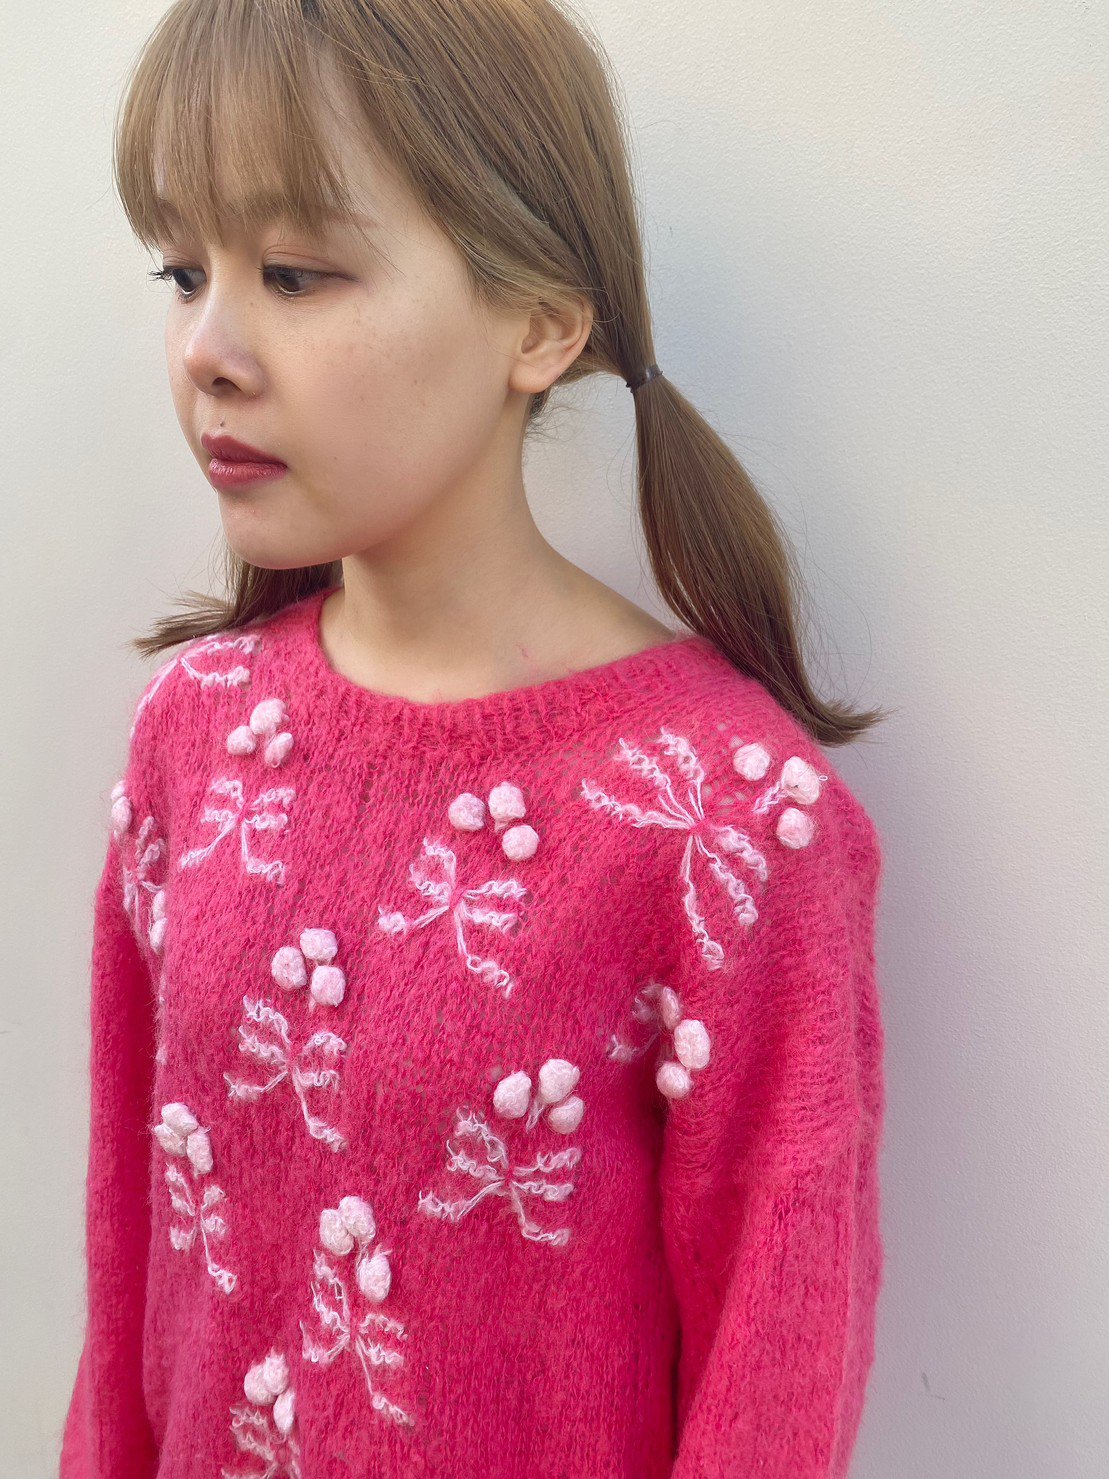 <img class='new_mark_img1' src='https://img.shop-pro.jp/img/new/icons20.gif' style='border:none;display:inline;margin:0px;padding:0px;width:auto;' />《SALE》vivid pink flower knit tops